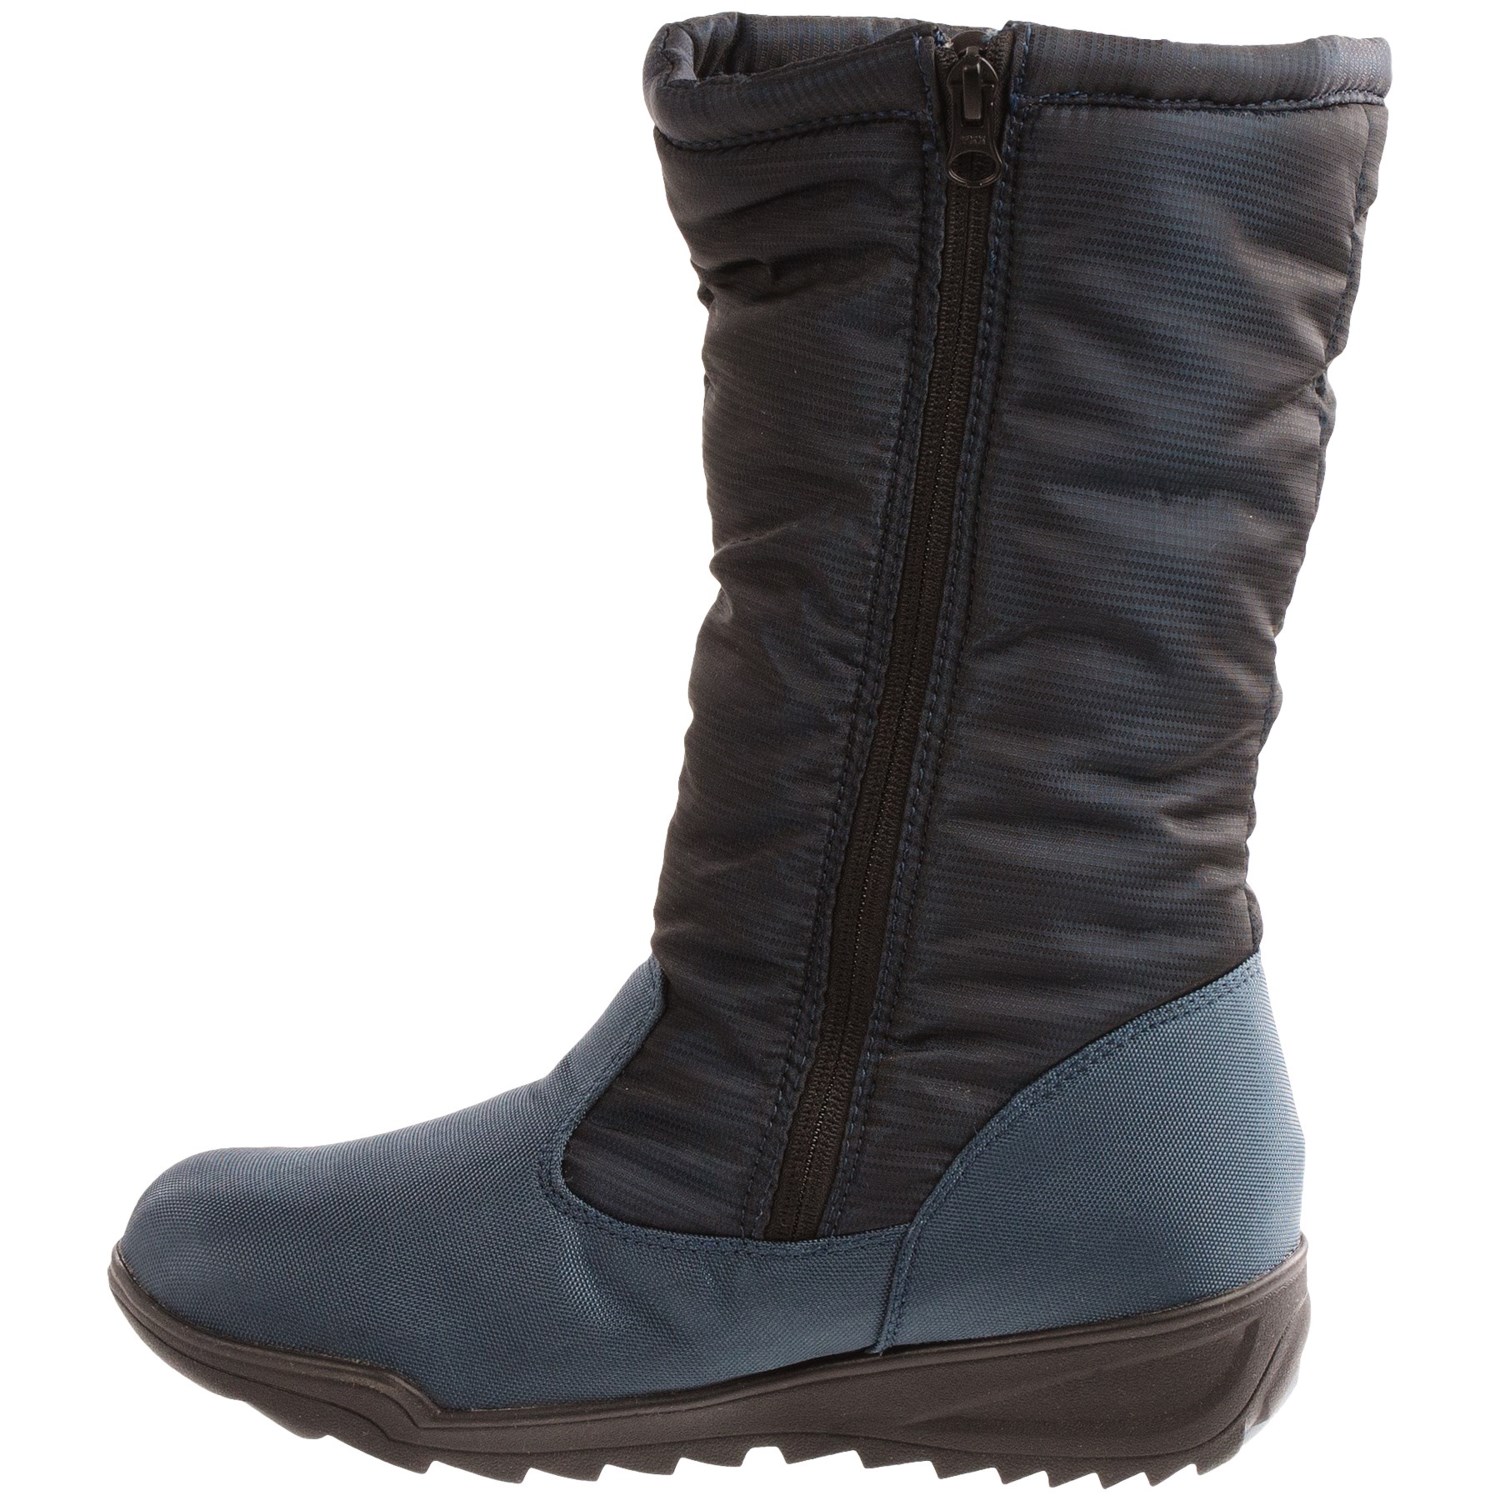 snow boots clearance ladies